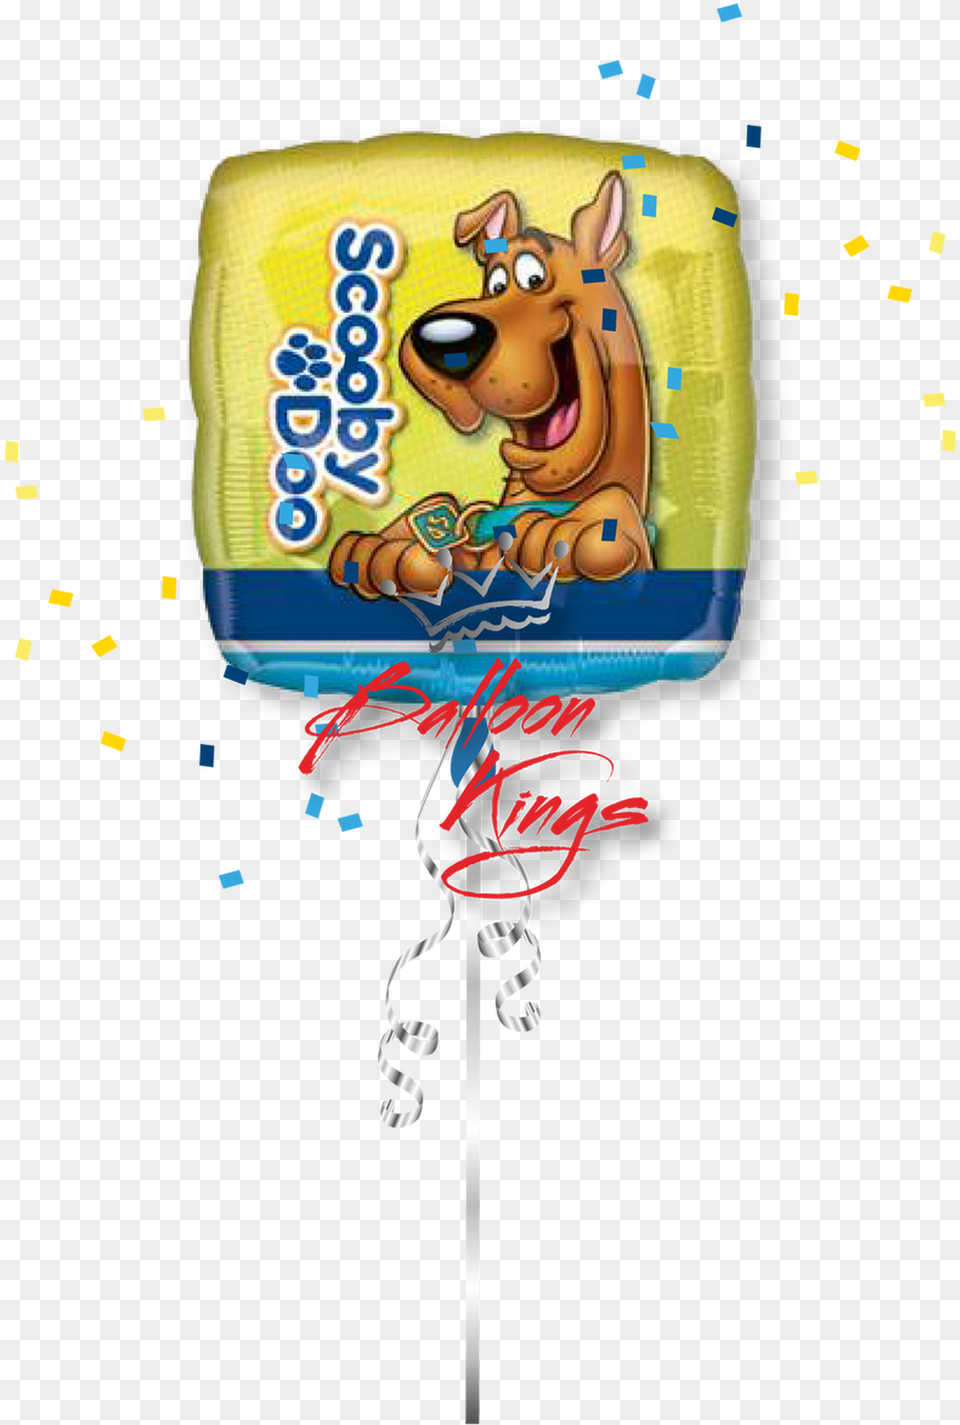 Scooby Doo Cartoons Scooby Doo, Food, Sweets, Birthday Cake, Cake Free Transparent Png